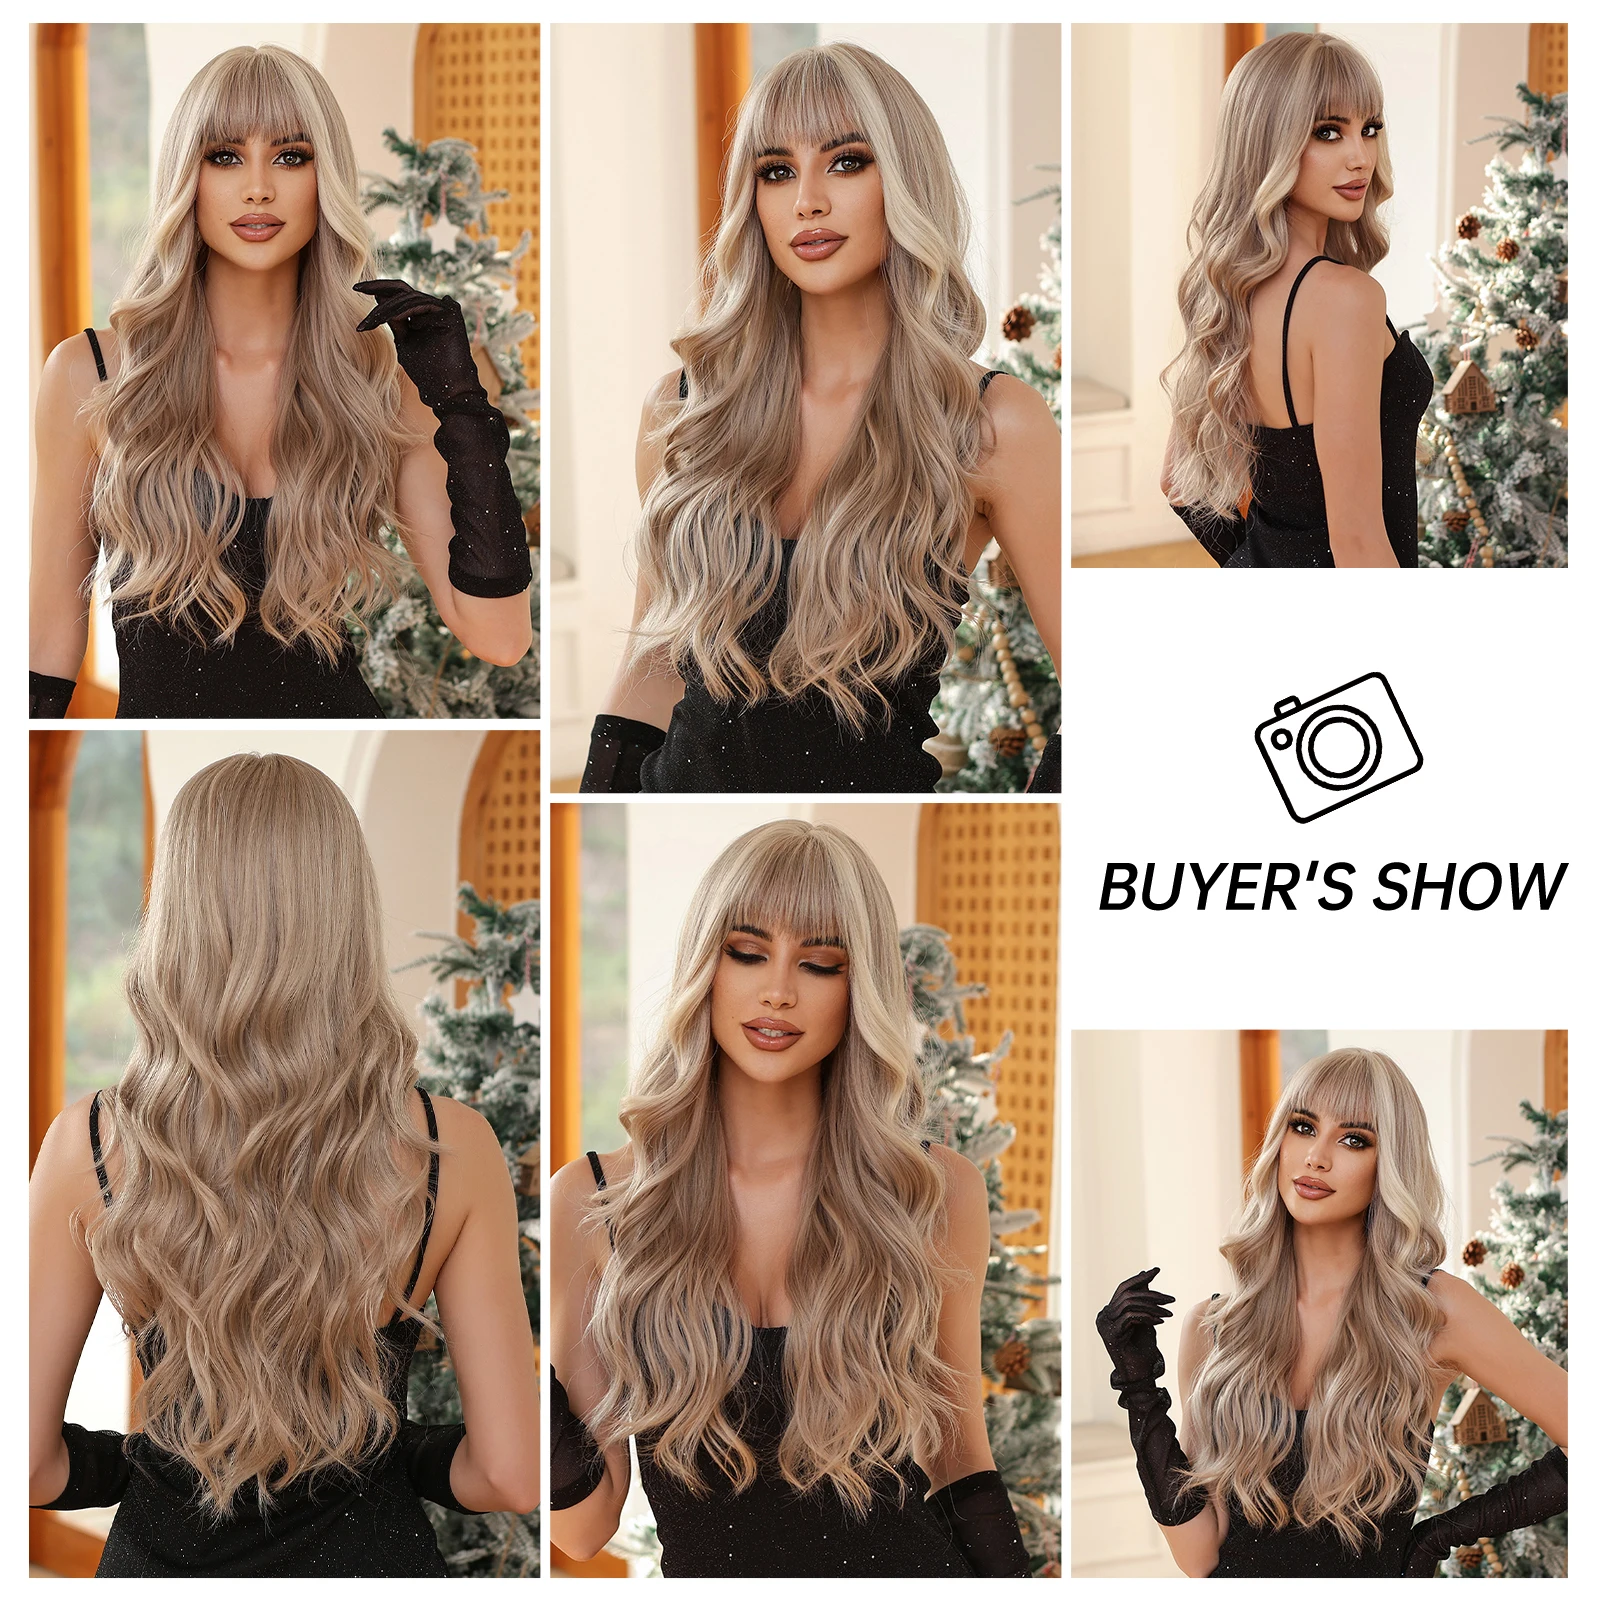 ALAN EATON Light Ash Blonde Wavy Synthetic Wigs Long Ombre Fake Hair Wave Wig with Bangs Heat Resistant Daily Wig for Women Use